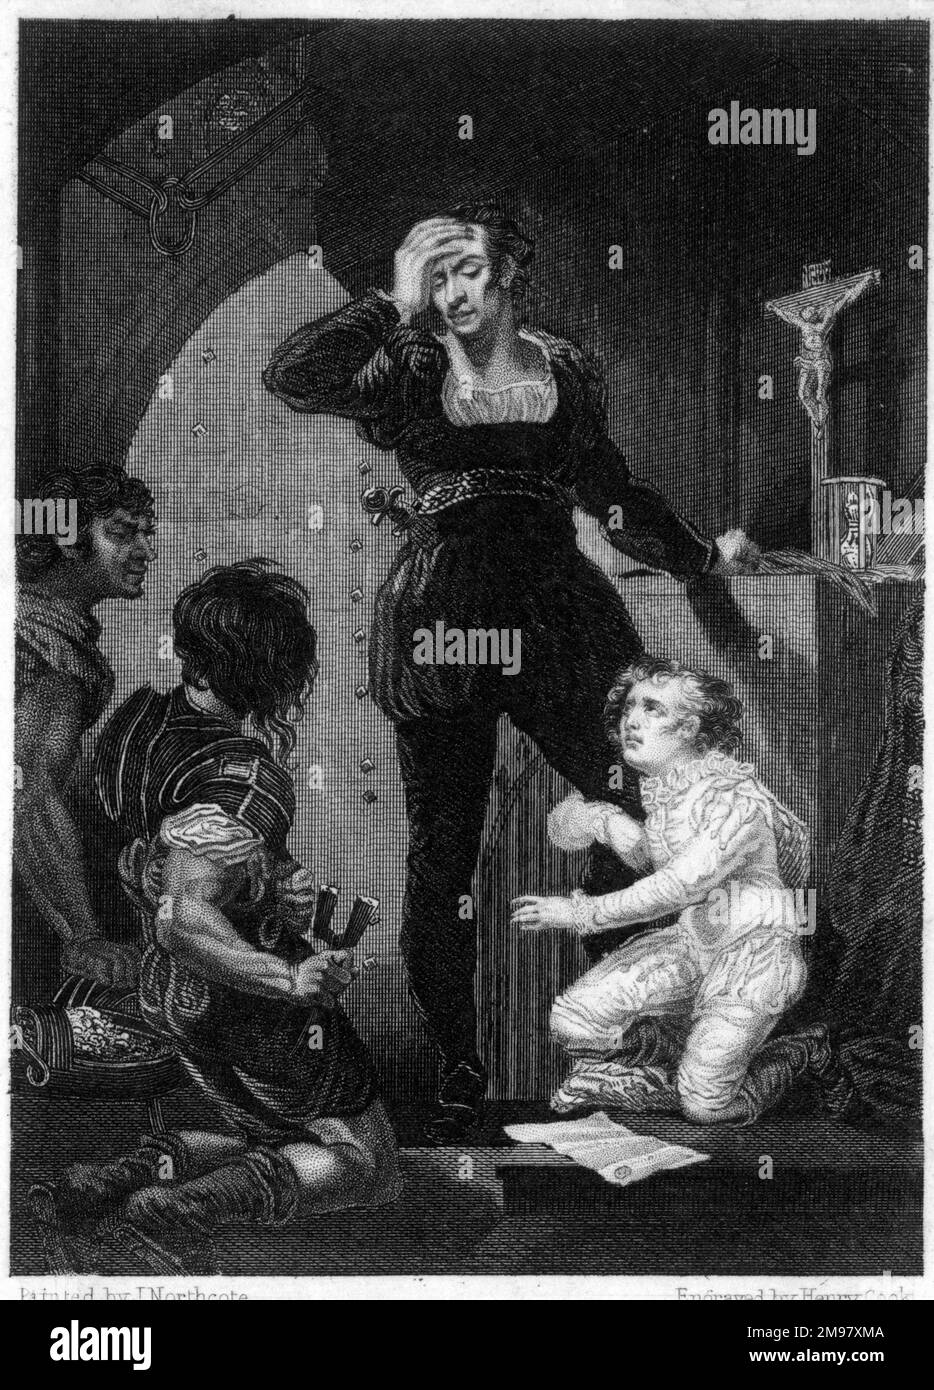 Hubert and Prince Arthur -- a scene from Shakespeare's play, King John. The young Prince Arthur, Duke of Brittany, was imprisoned at the Chateau de Falaise, guarded by Hubert de Burgh, 1st Earl of Kent. Arthur had at one time been Richard I's preferred successor. Arthur disappeared in April 1203 and many saw the hand of King John in his fate. Stock Photo